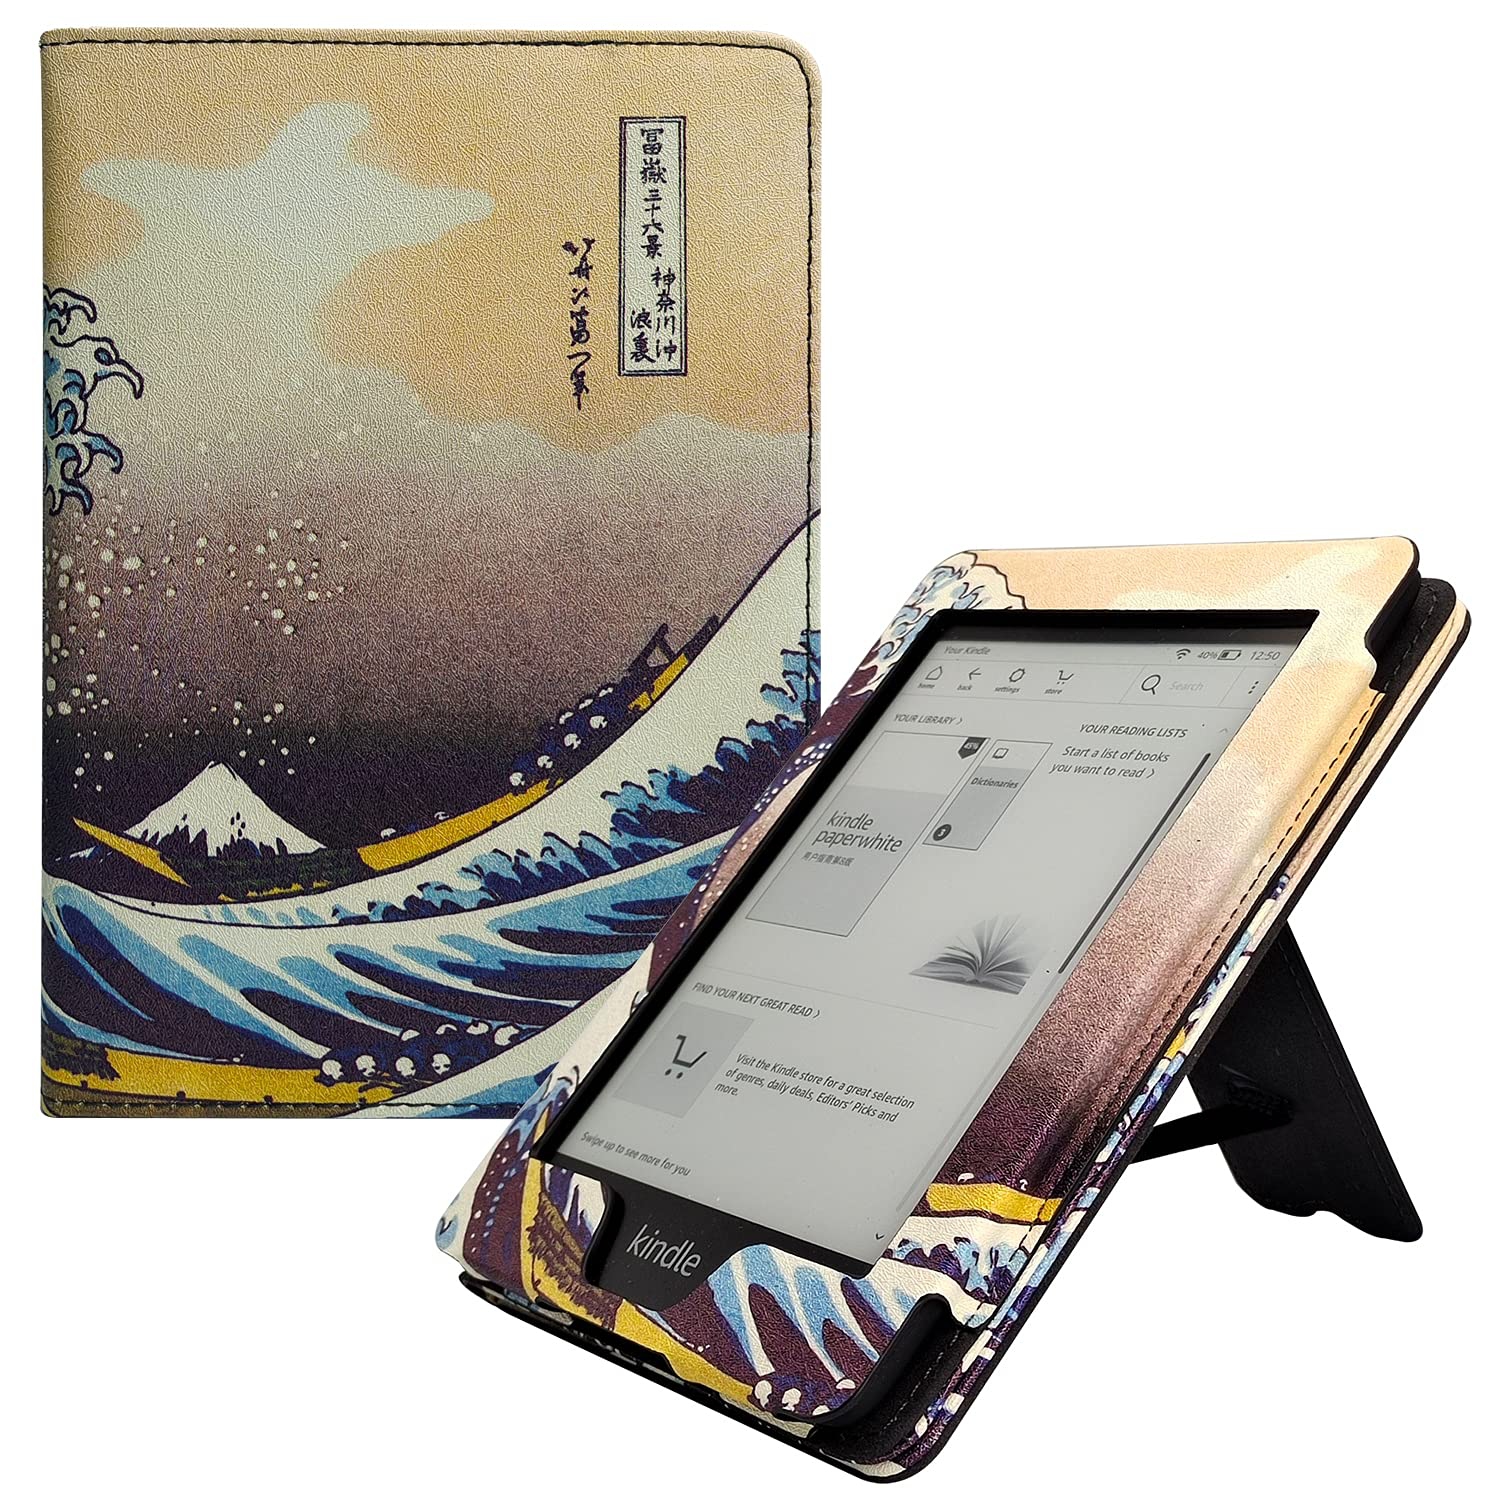 GOVTVA Kindle Paperwhite Case Fits All-New 10th Gen- 2018 / 6 Inch All Paperwhite Generations - PU Leather Sleeve Stand Cove